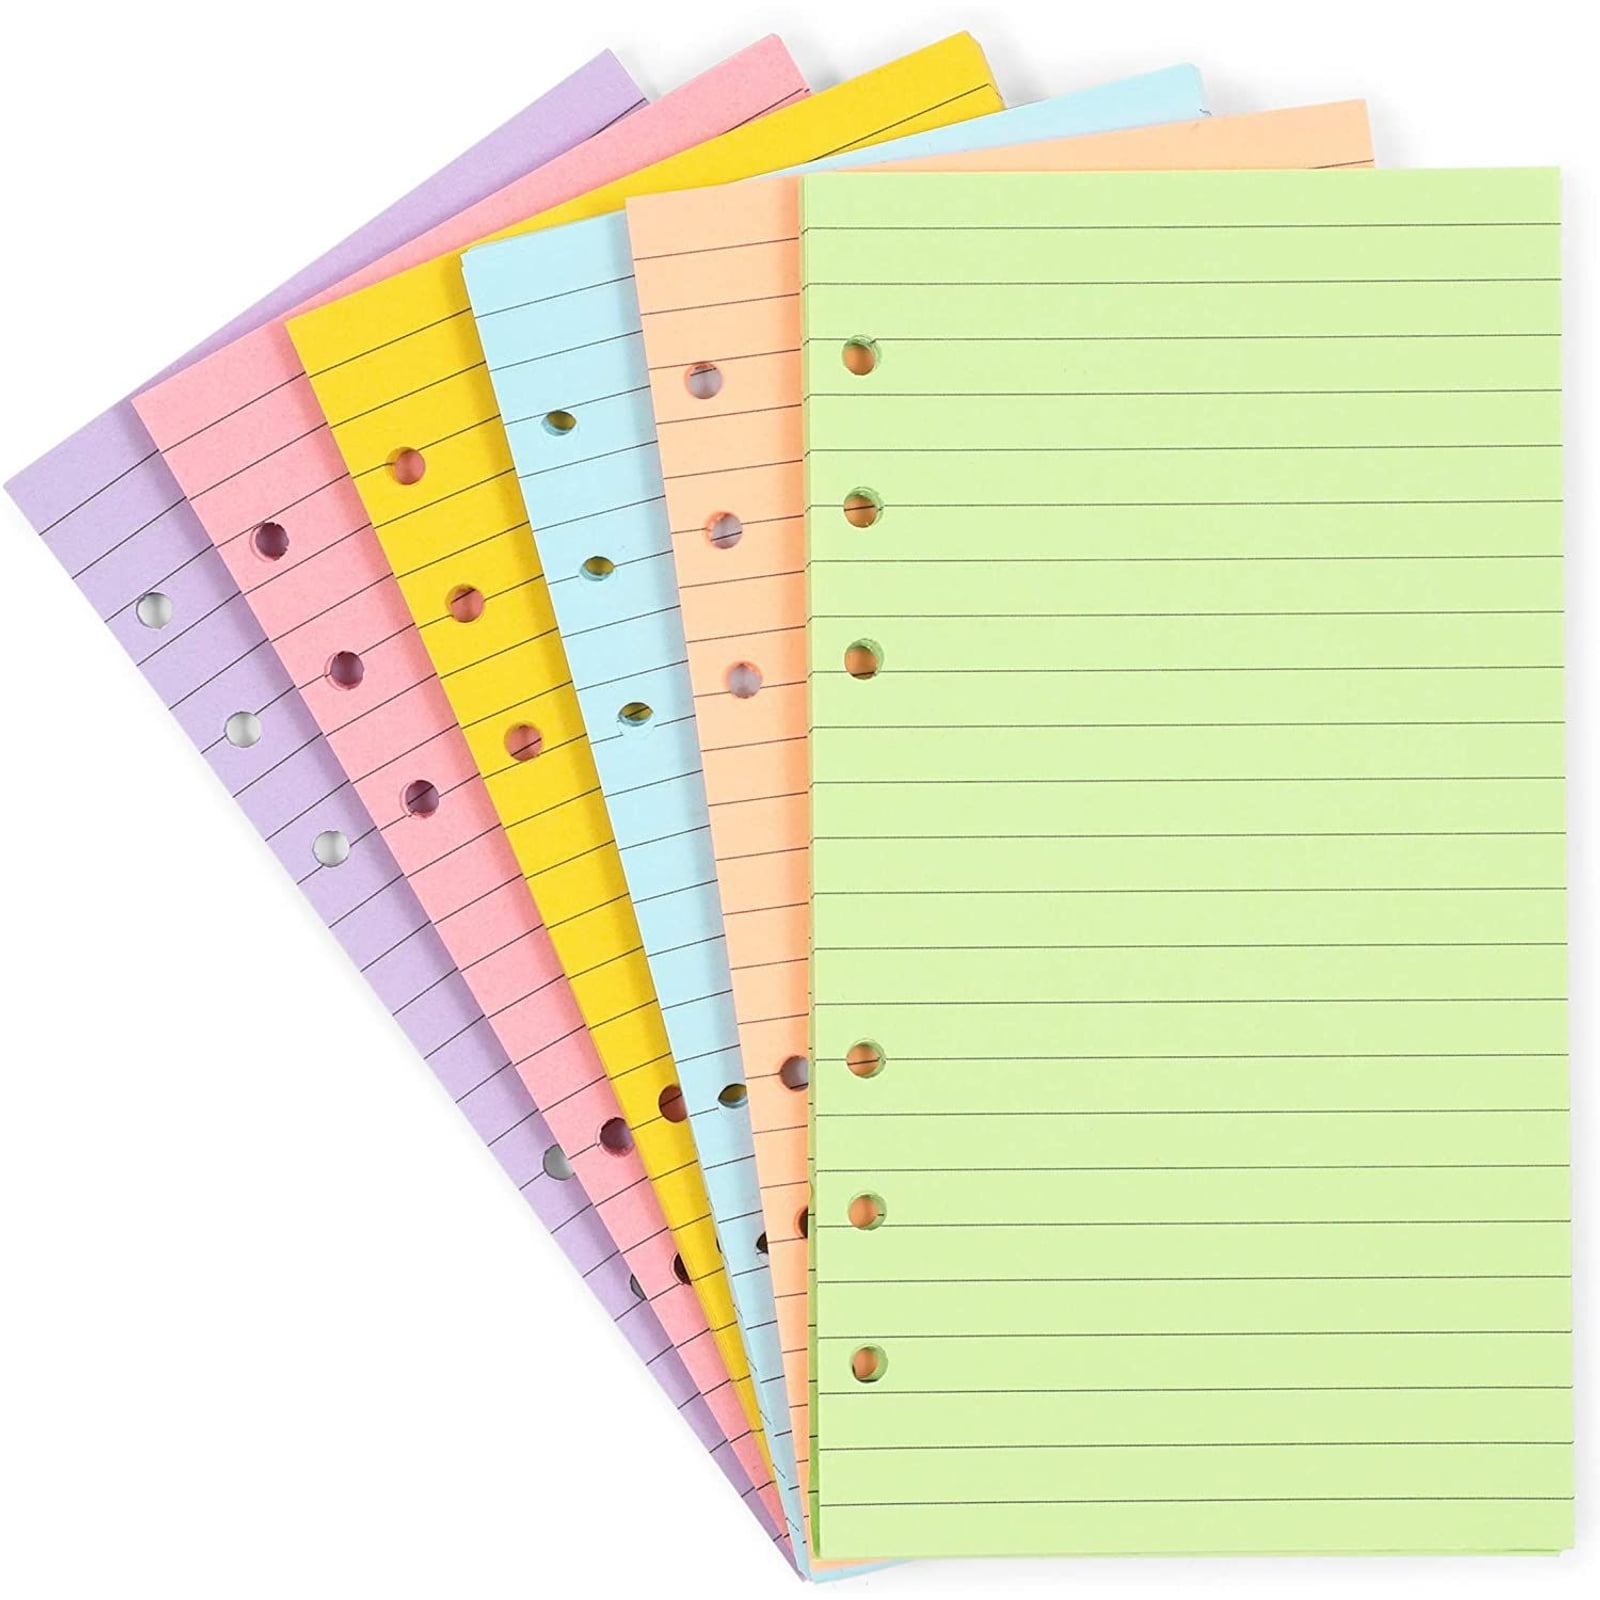 4 x 6 "  100 Sheets Refill Note Paper DOG PAW*  Loose Sheets Lot of 3* 